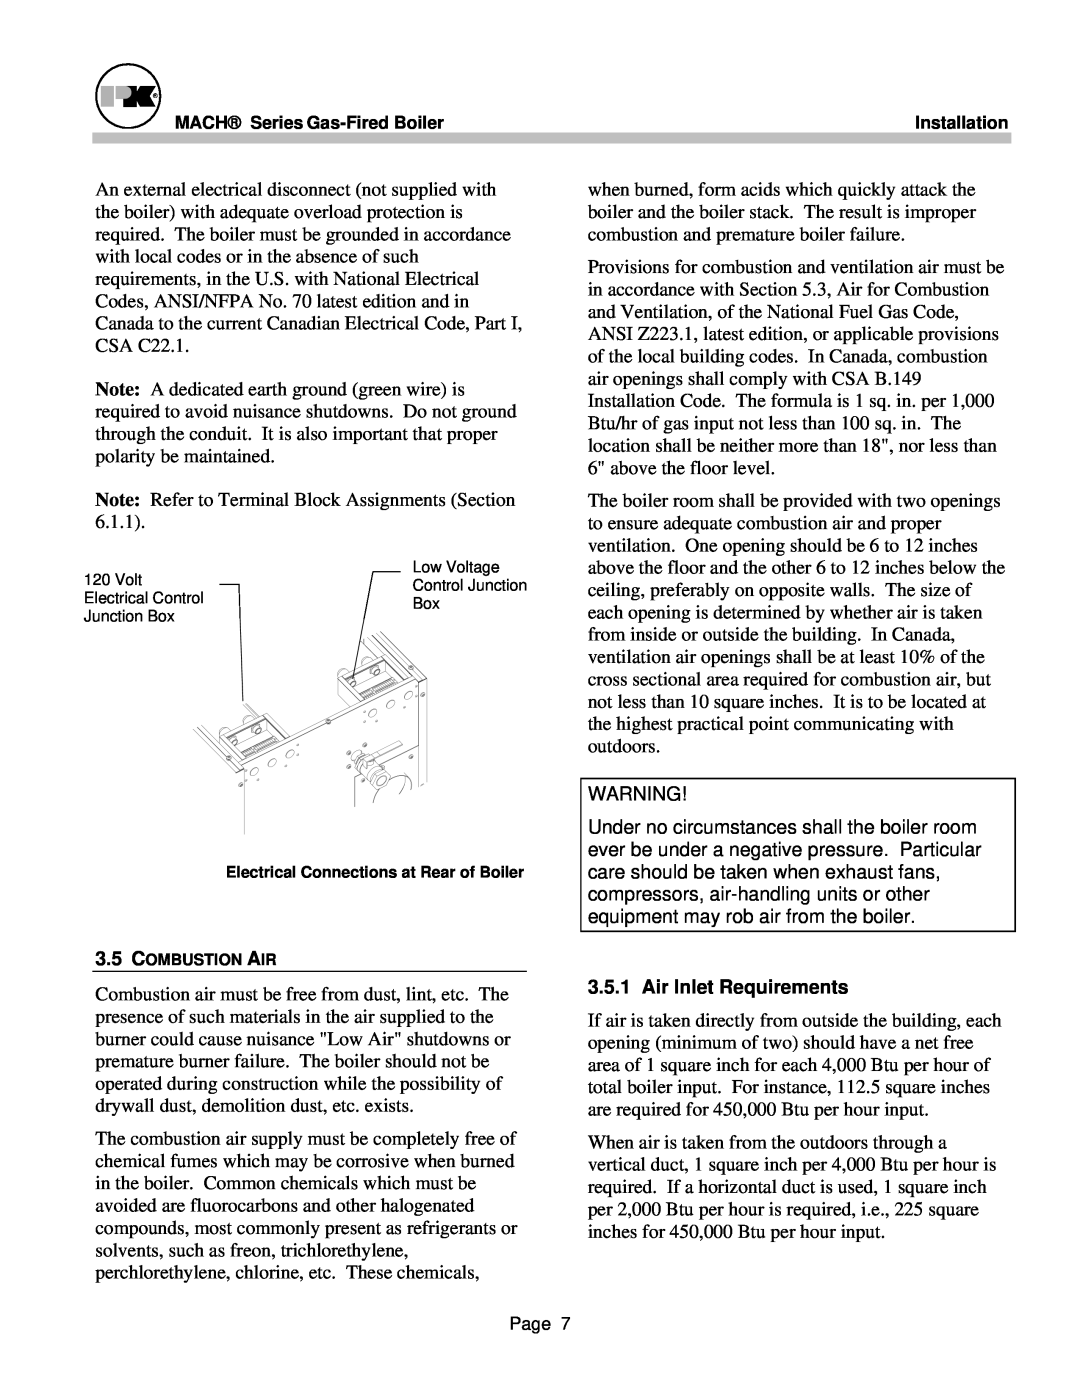 Patterson-Kelley MACH-05 manual Air Inlet Requirements 